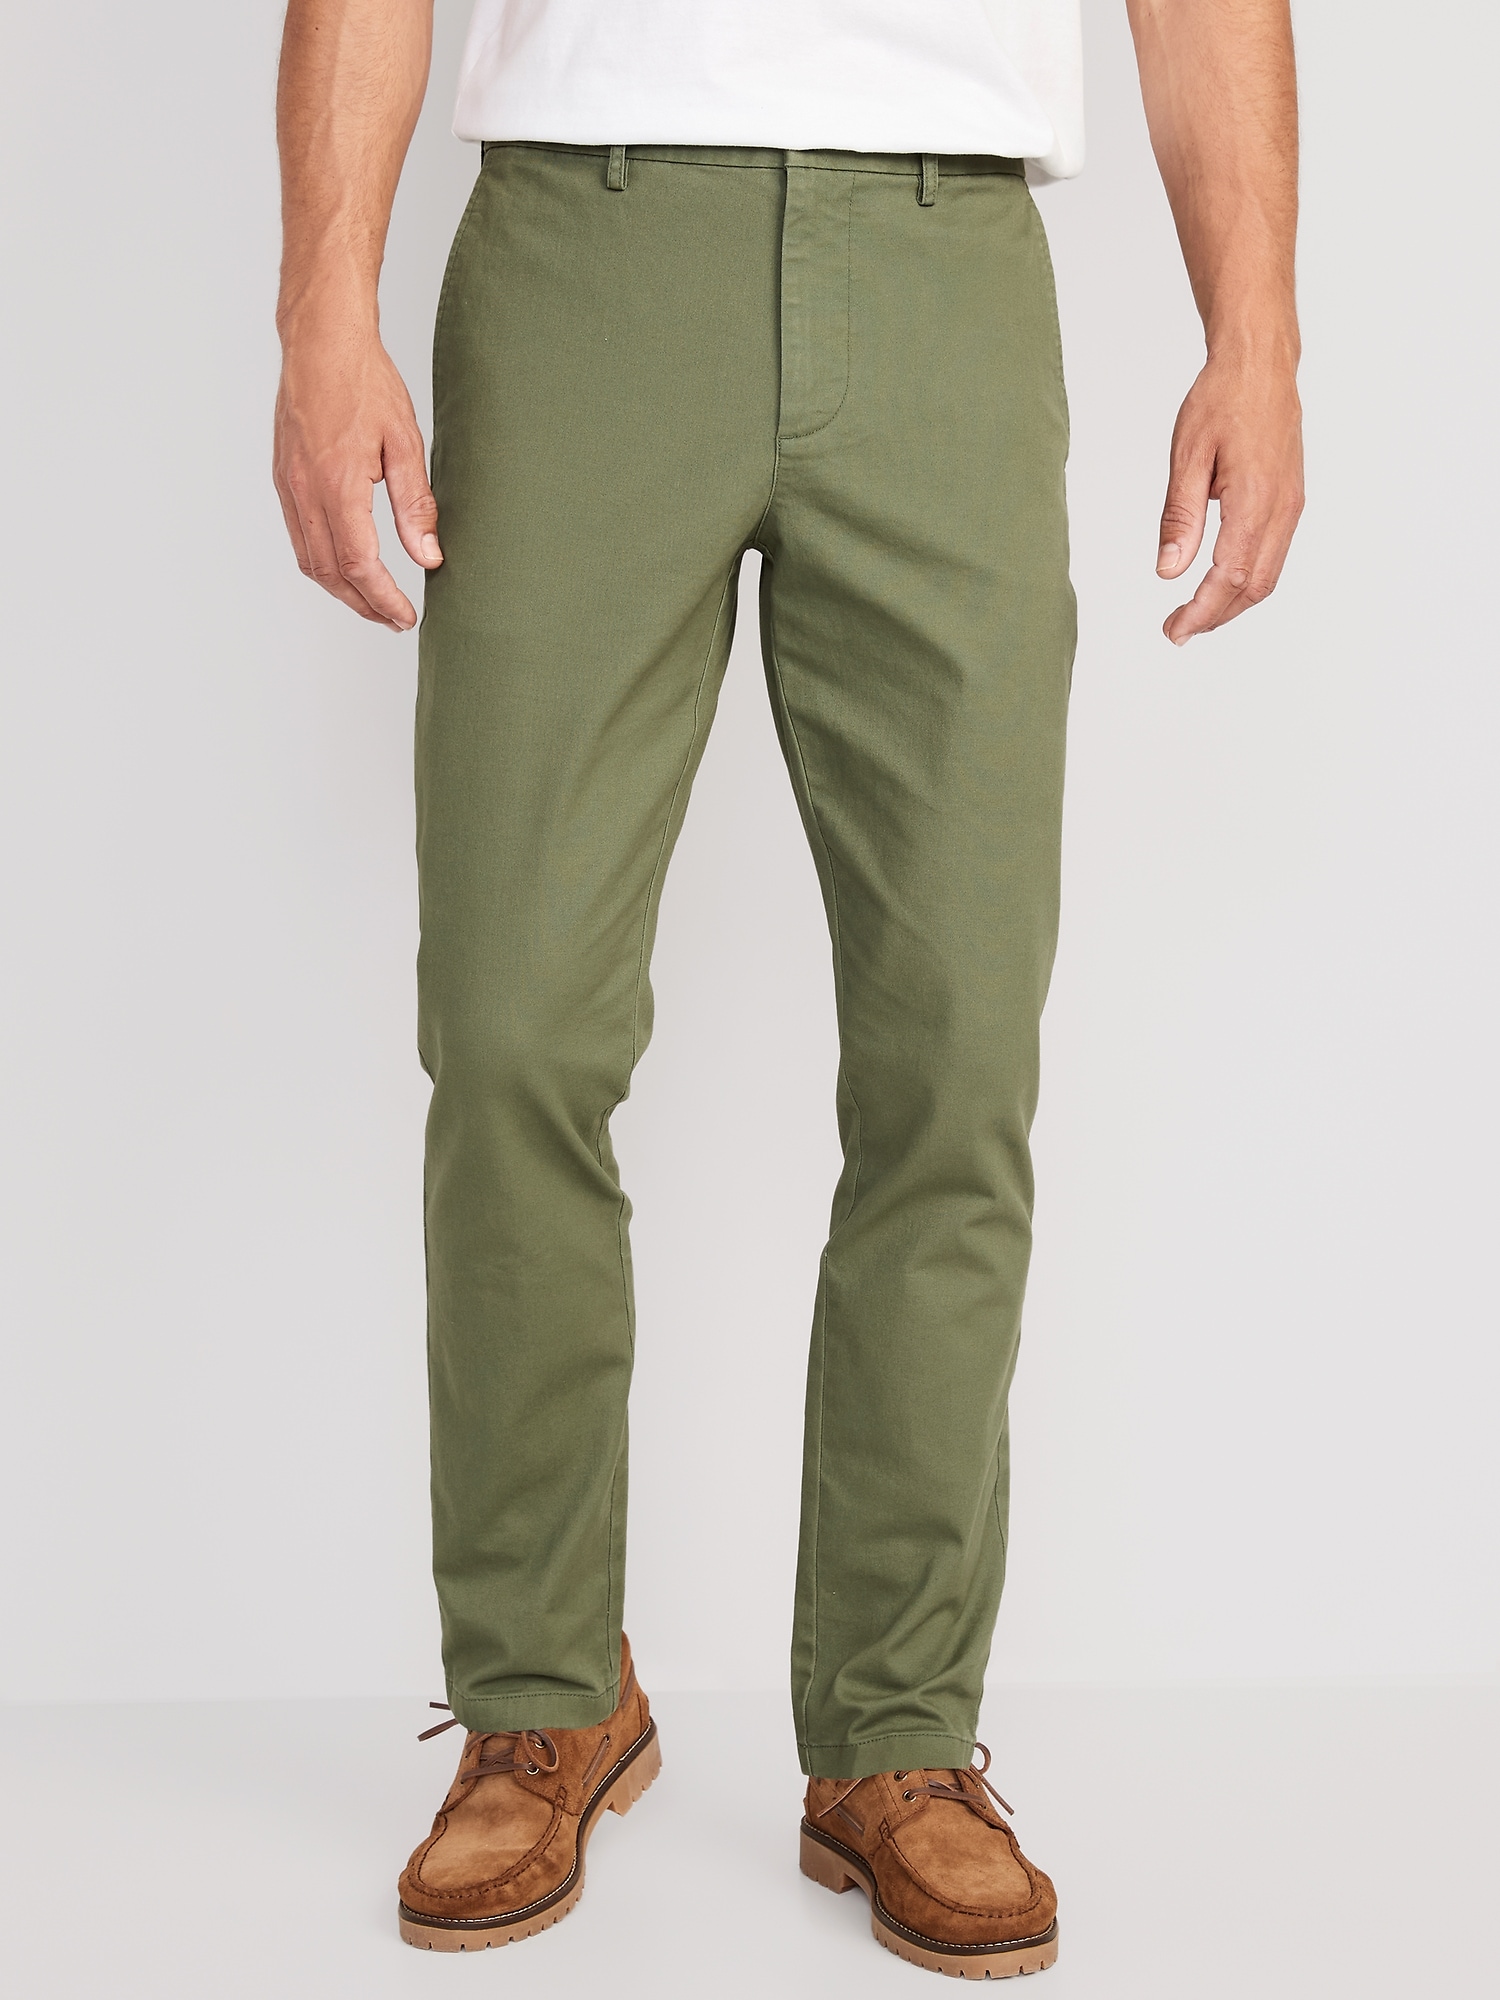 Old Navy Slim Built-In Flex Rotation Chino Pants green. 1